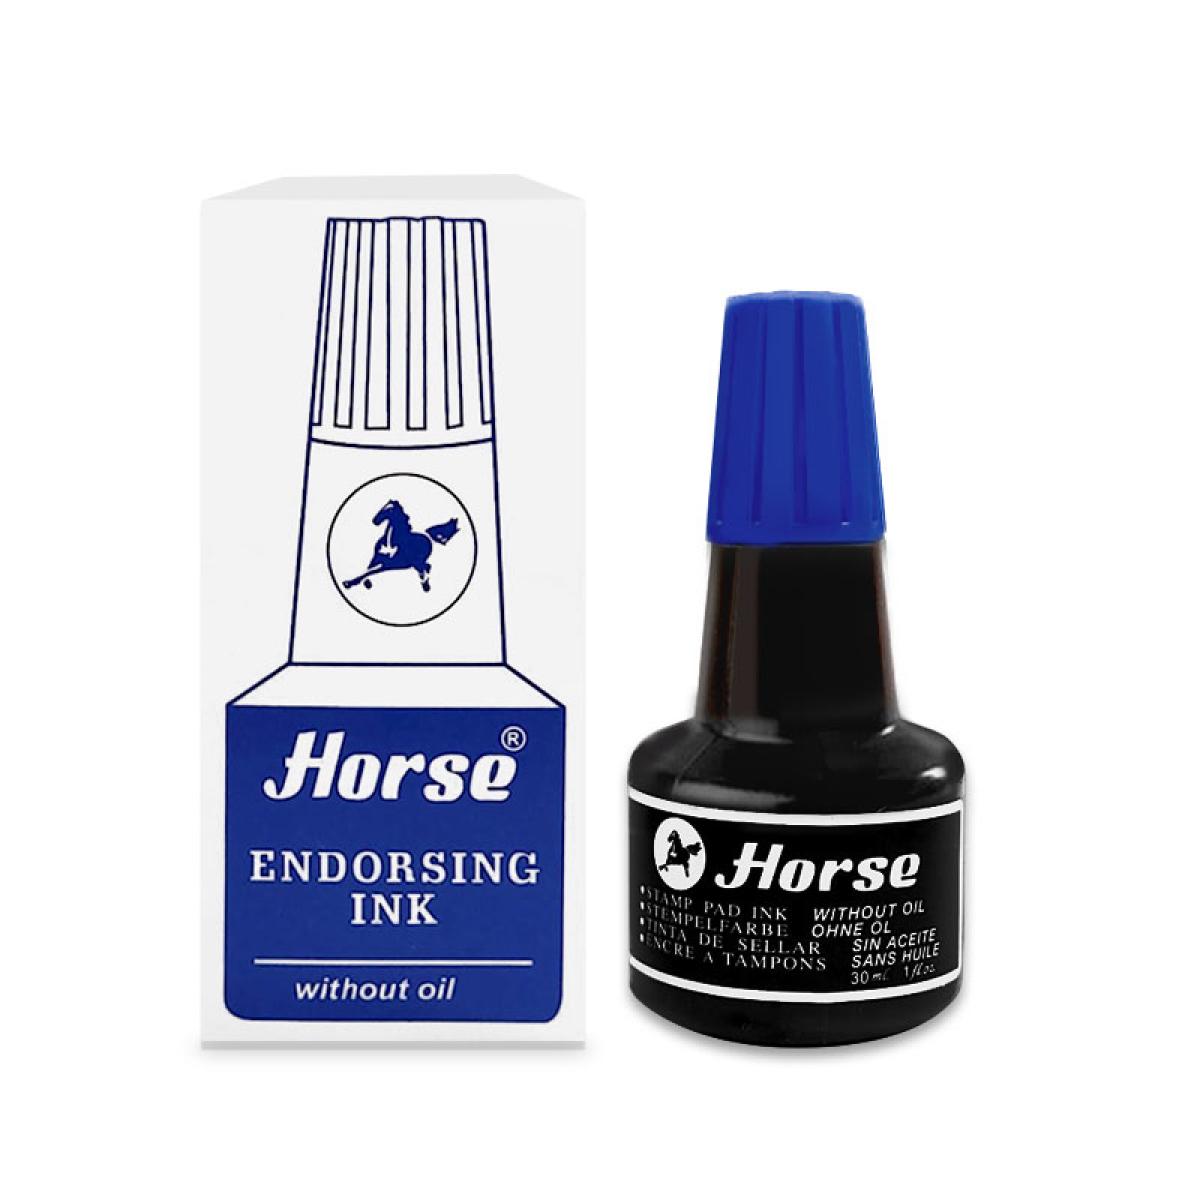 Horse Refilling Ink Stamp Pad Blue-Red-Black Without oil New